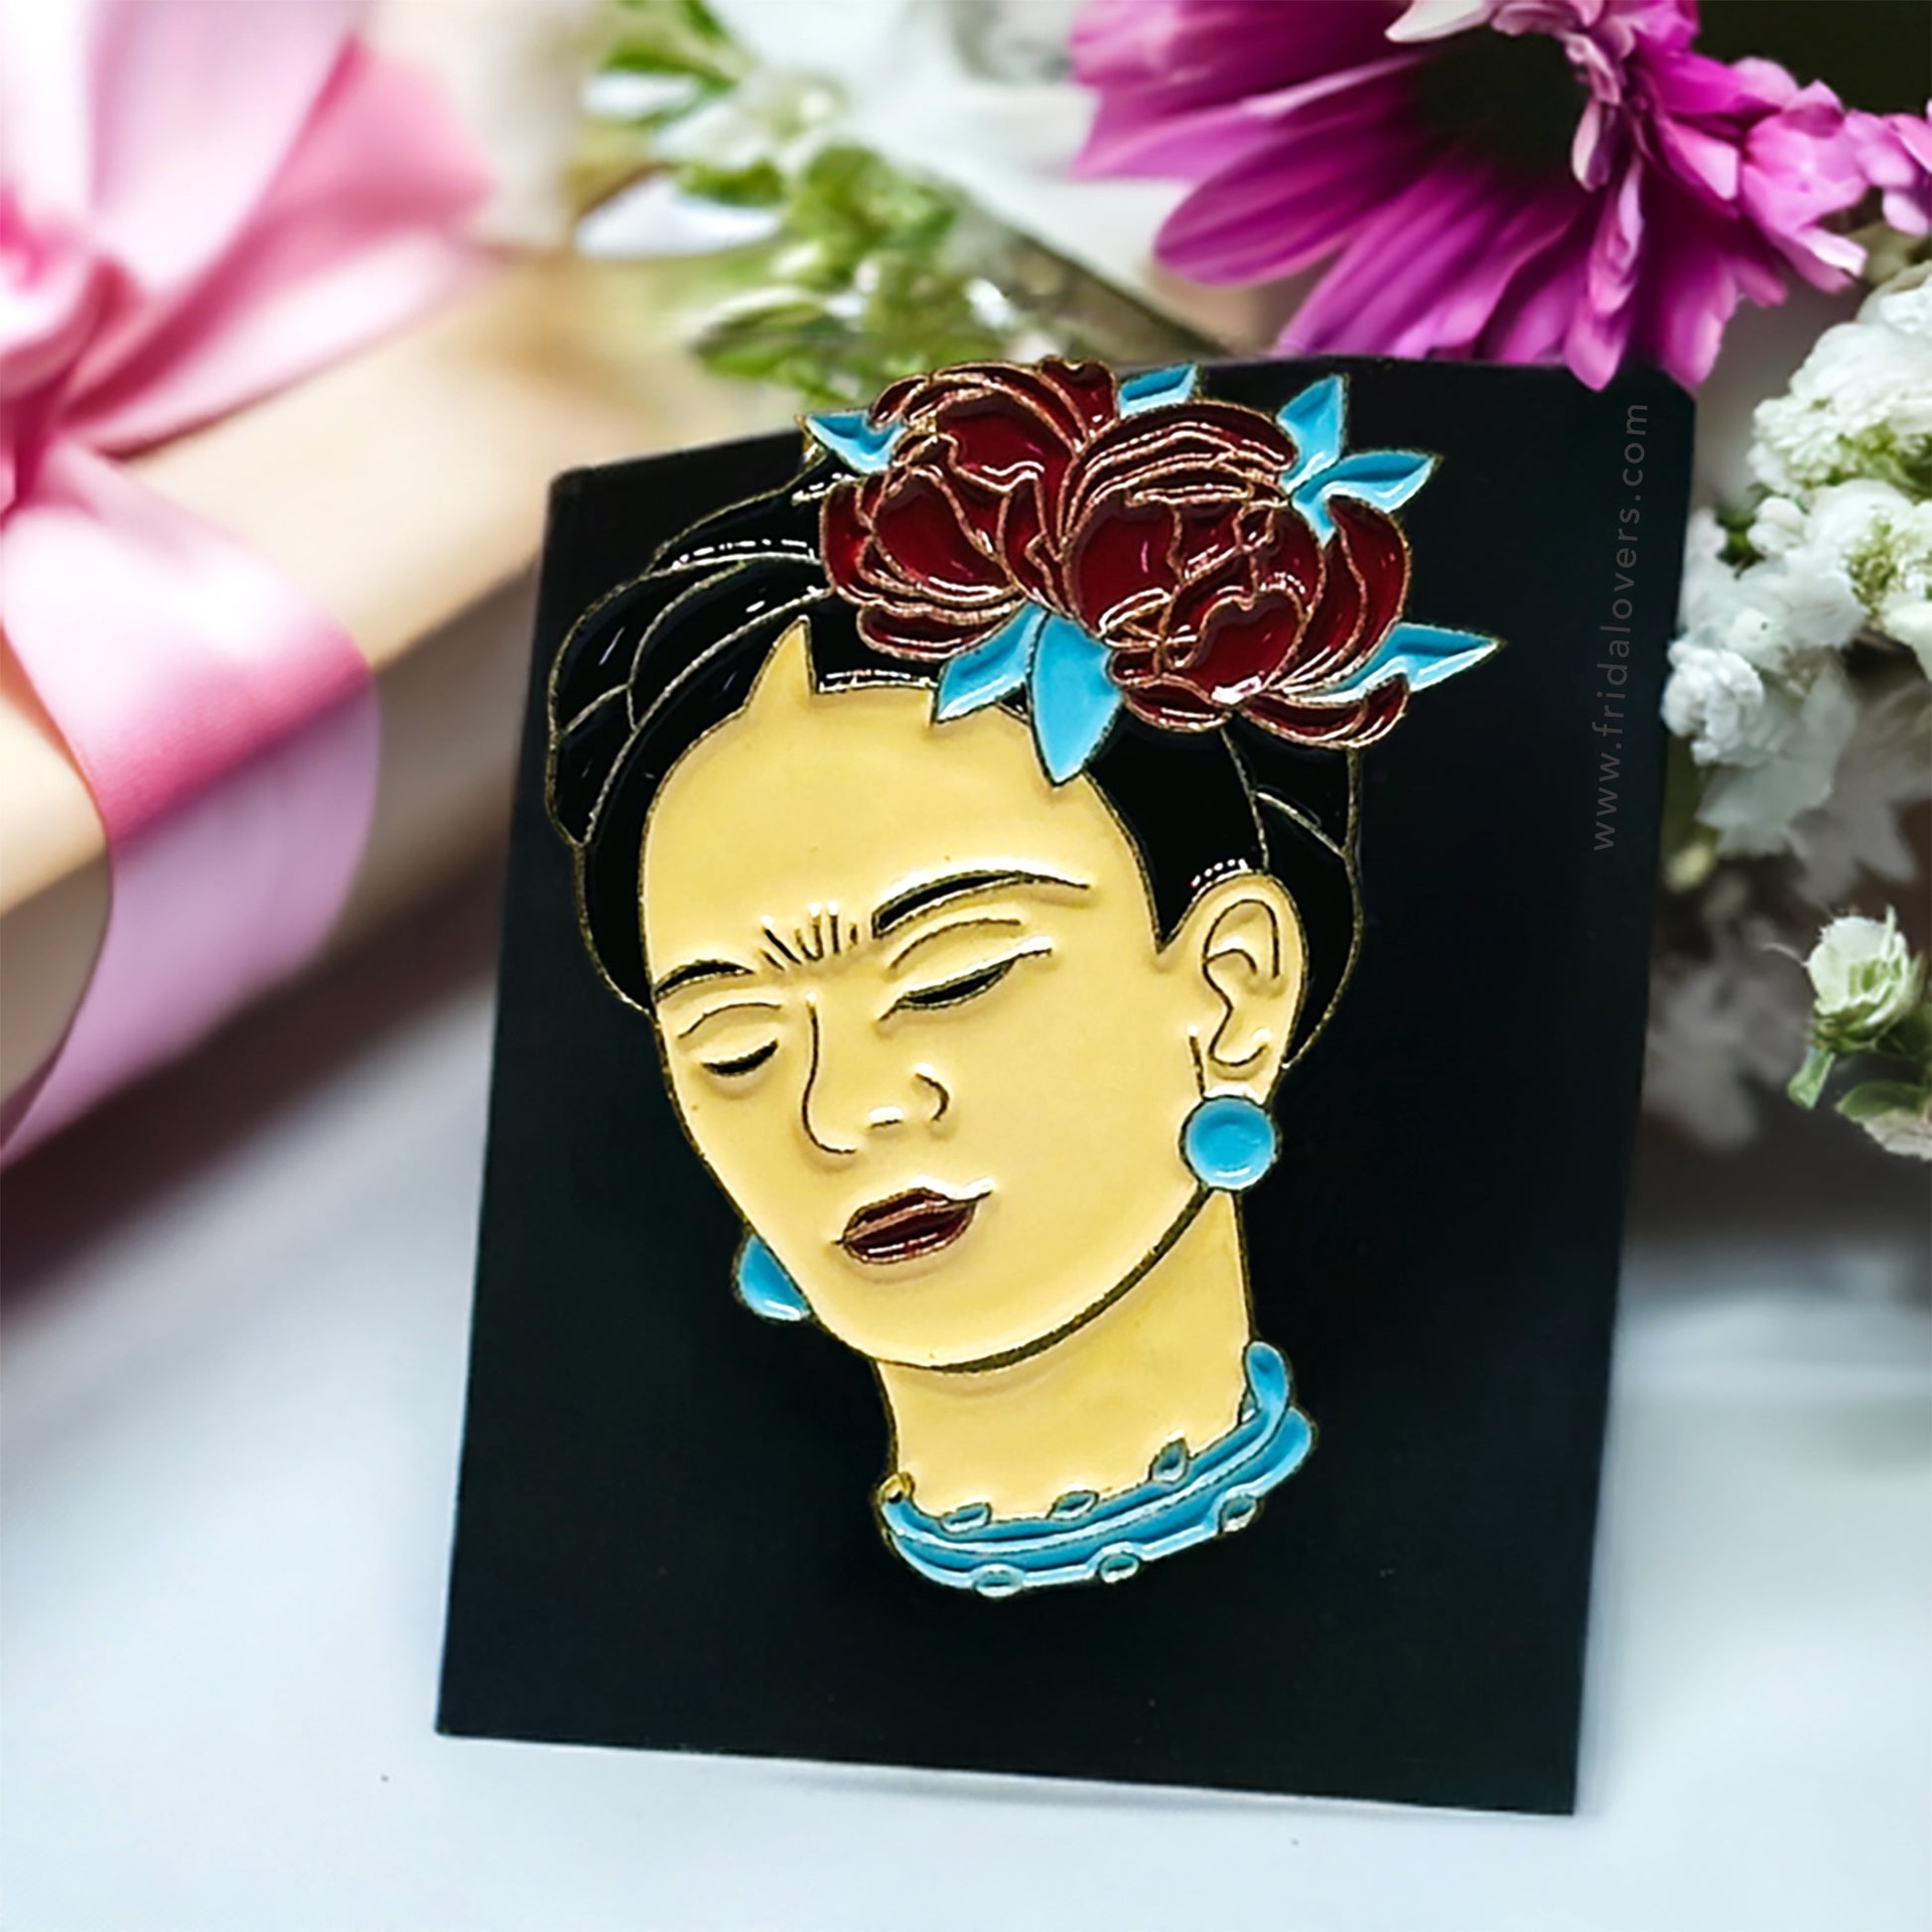 Chic Frida Enamel Pin Mexican Artist Inspired Brooch Floral Women and Girls Frida-Fans Cool Gift Idea Casual Fashion Accessory Broche Mujer